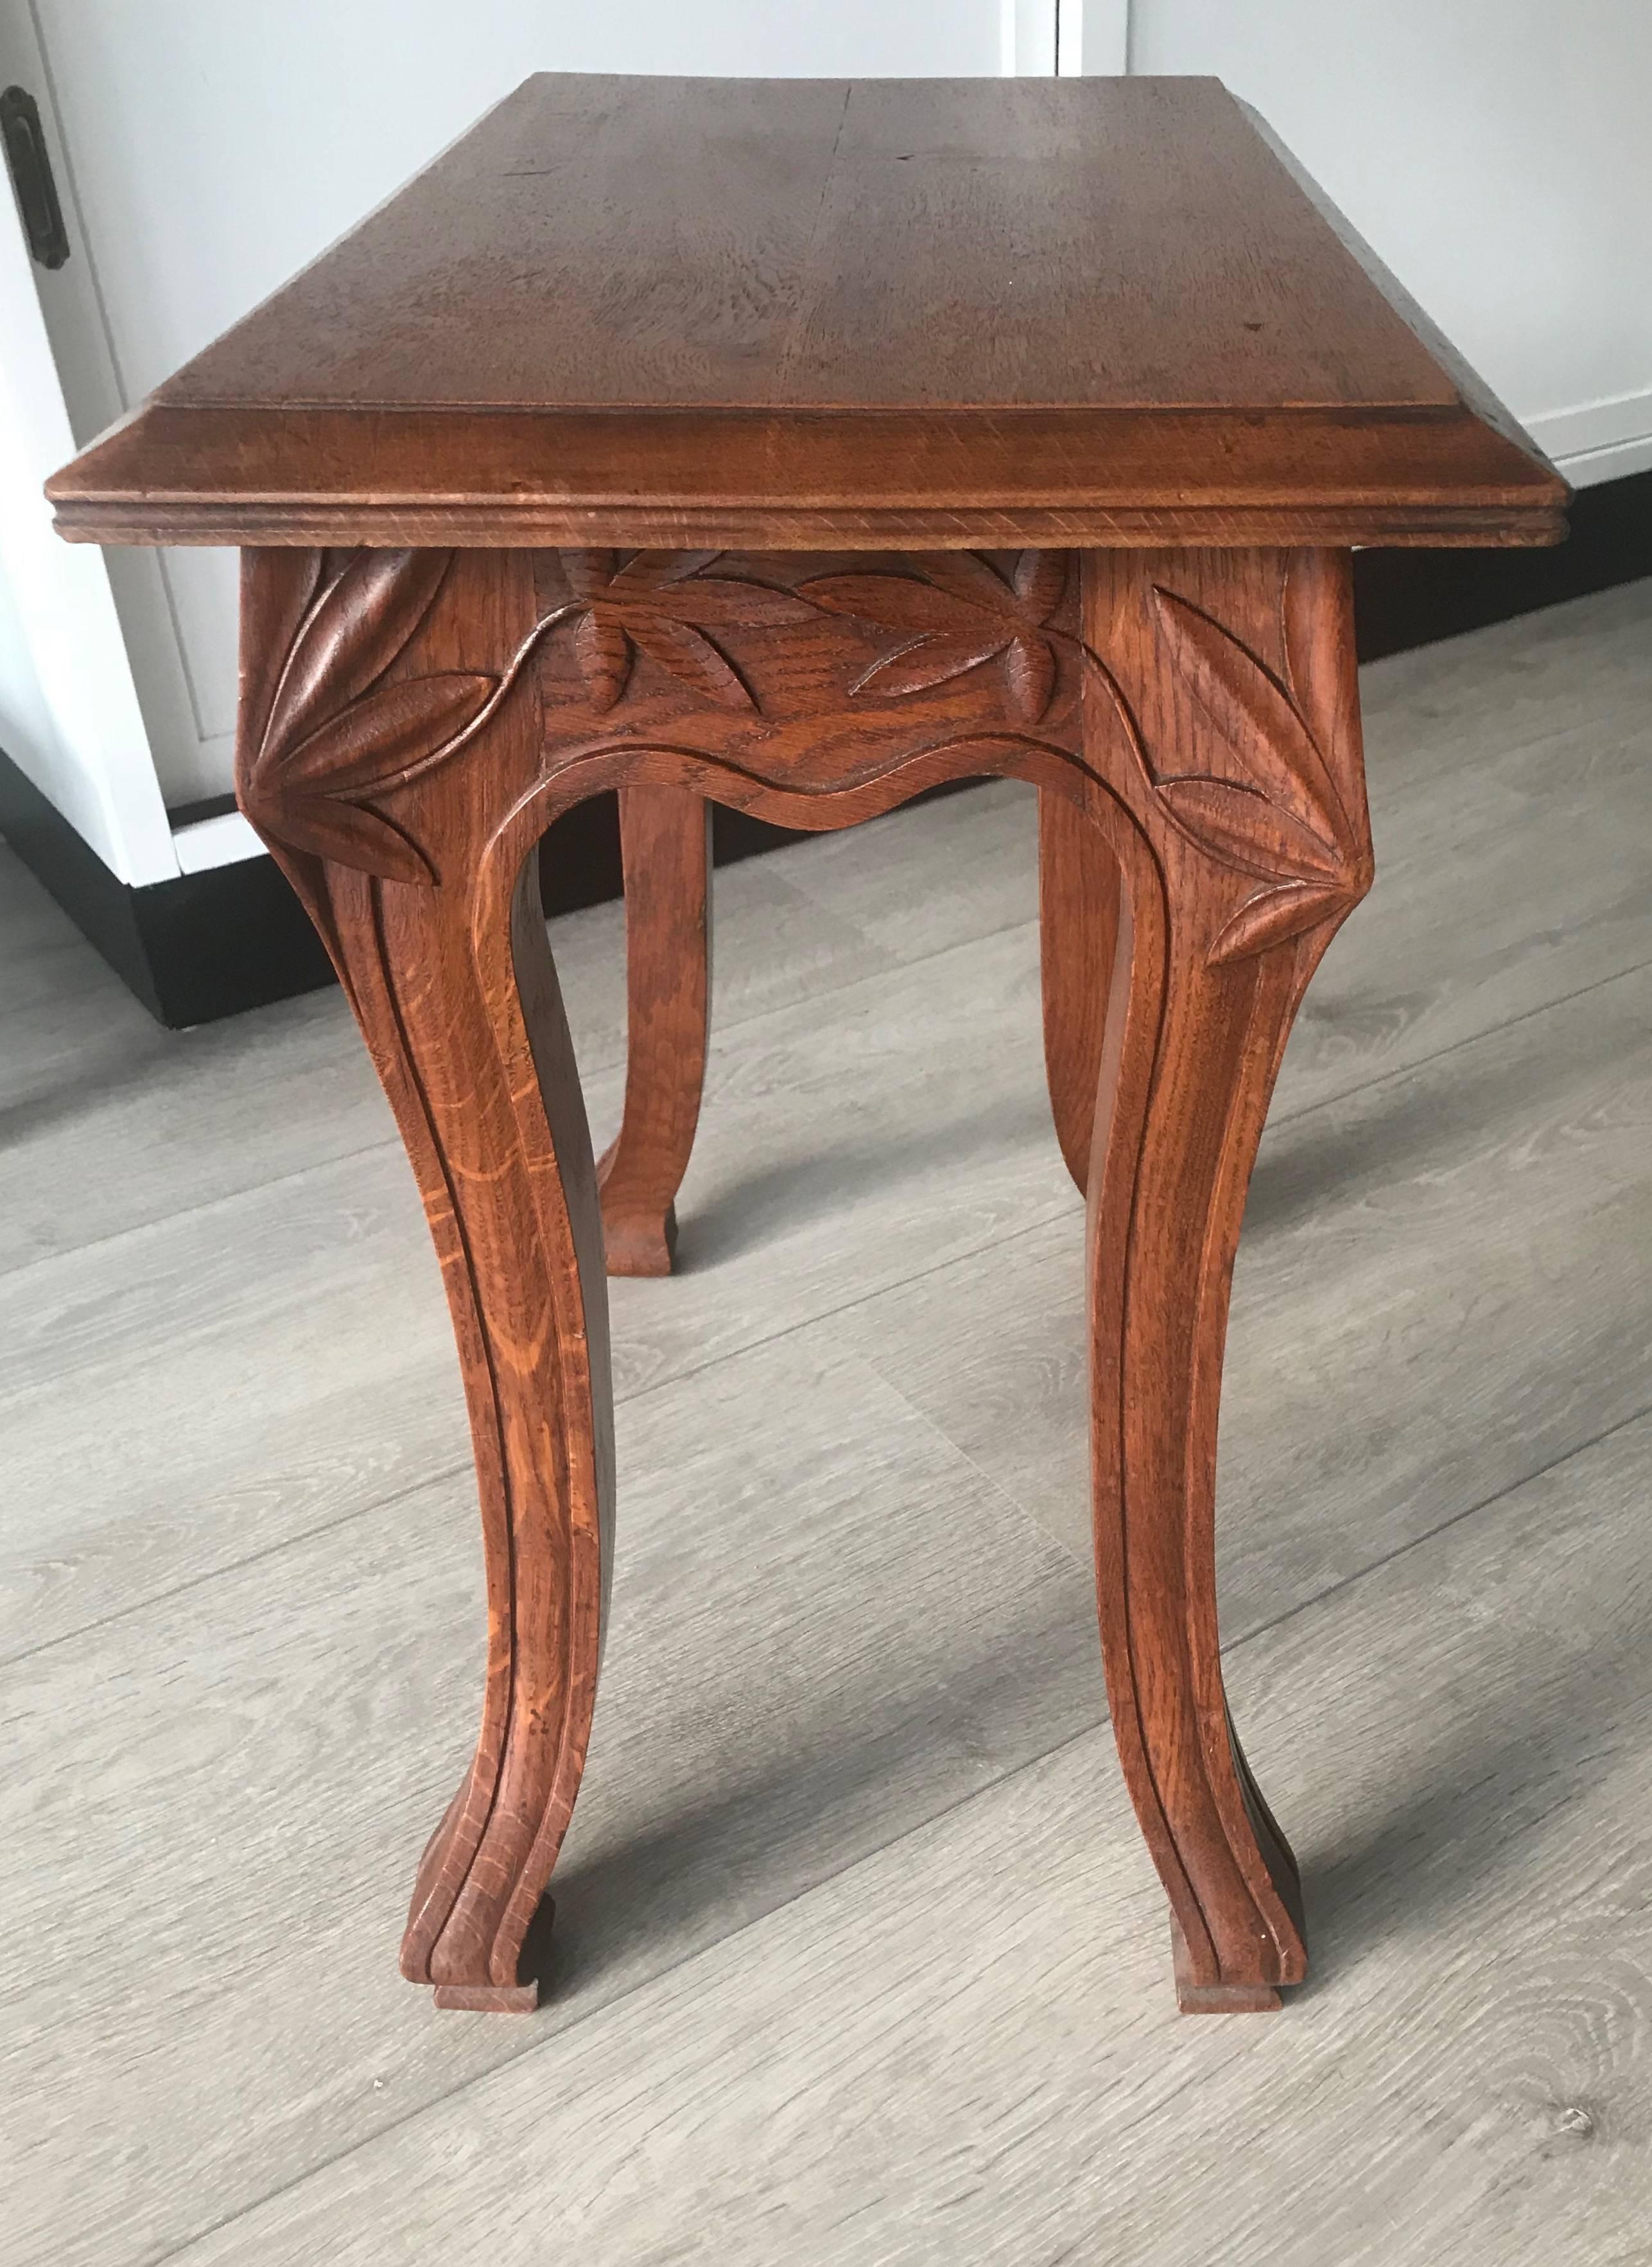 European Early 20th Century Quality Carved Small Jugendstil End or Side Table or Stand